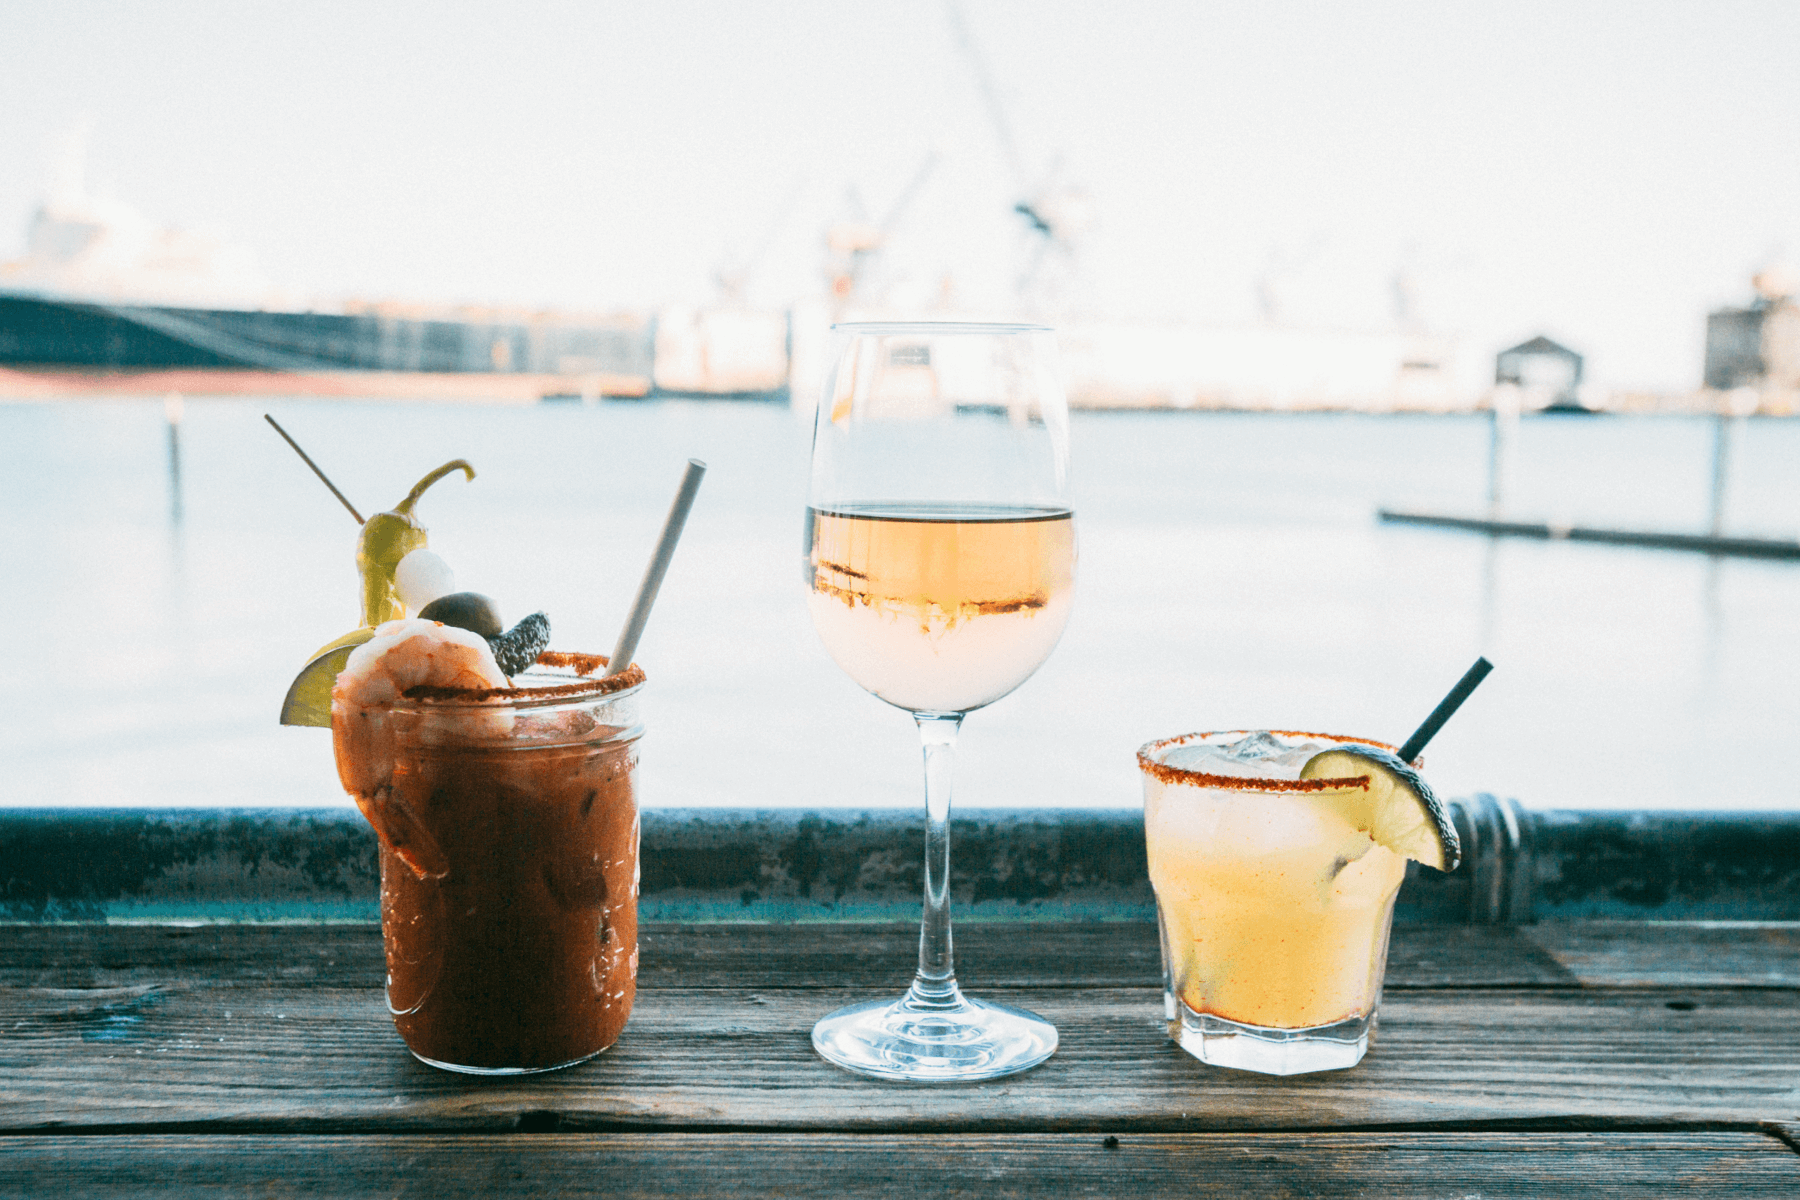 A bloody mary, a glass of wine, and a margarita on a bar overlooking water.